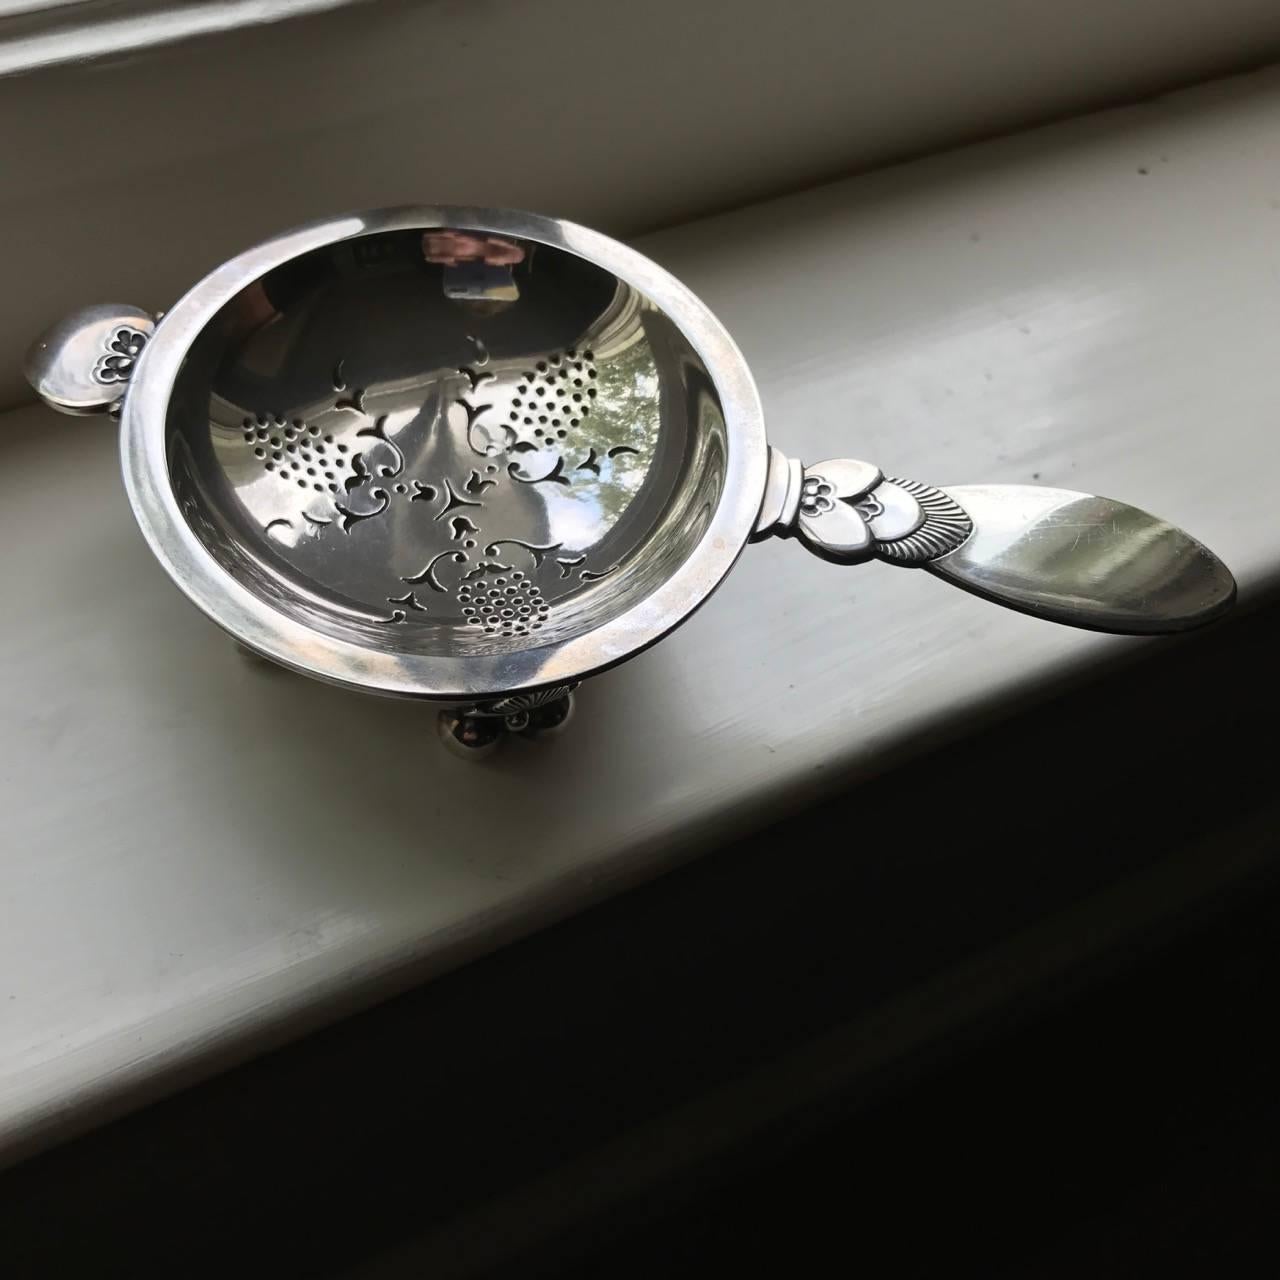 Georg Jensen Sterling Silver Cactus Tea Strainer on Stand No 646A Very Rare

1933-1944 Hallmarks and excellent condition.

Gundorph Albertus (1887 - 1970) was an important figure at the Georg Jensen Silversmithy for over forty years. In 1905 he